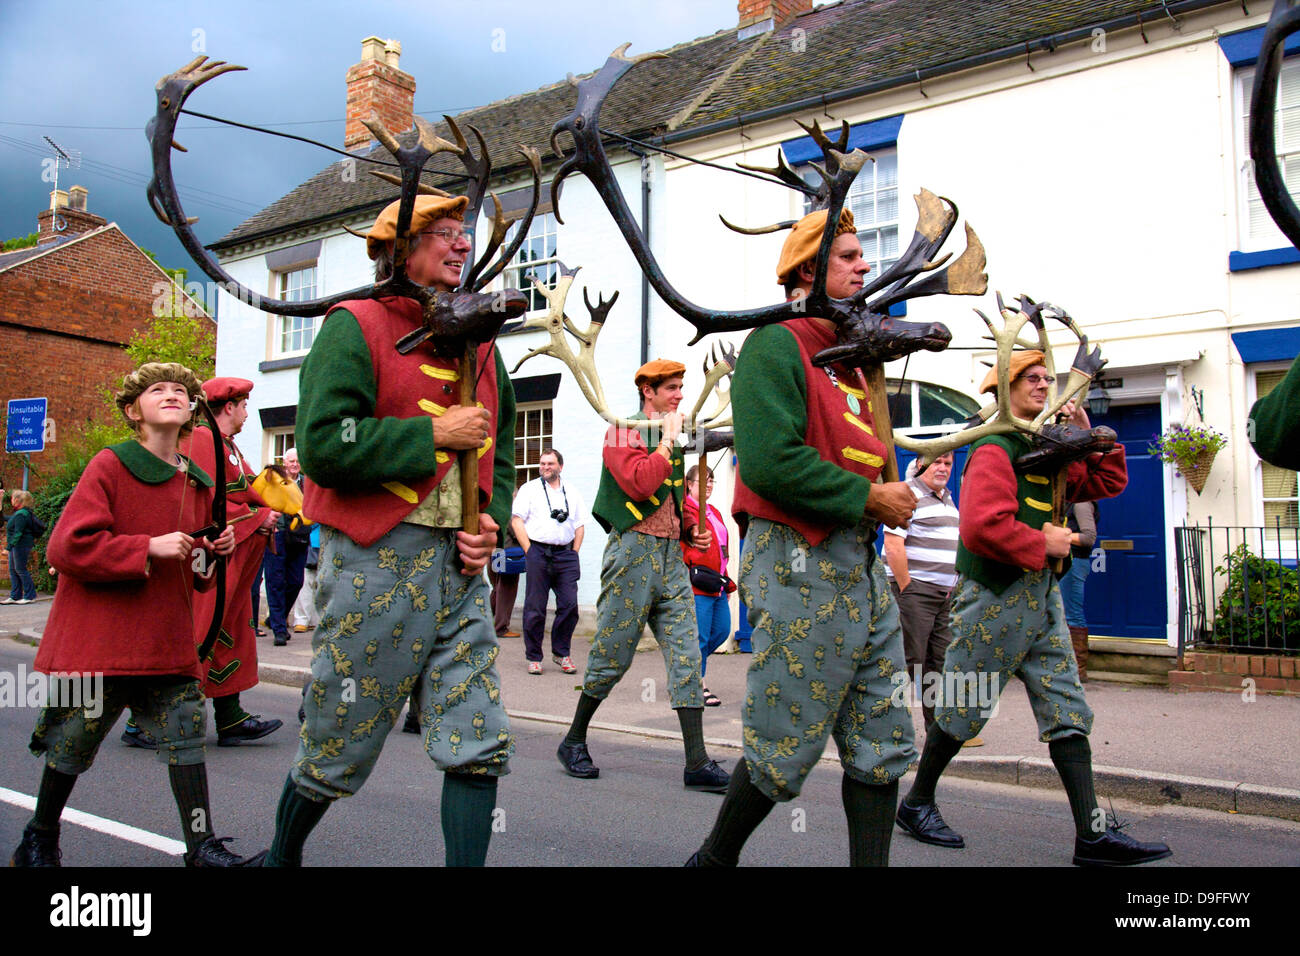 Abbots Bromley Horn Dance, Abbots Bromley, Staffordshire, England, UK Stock Photo